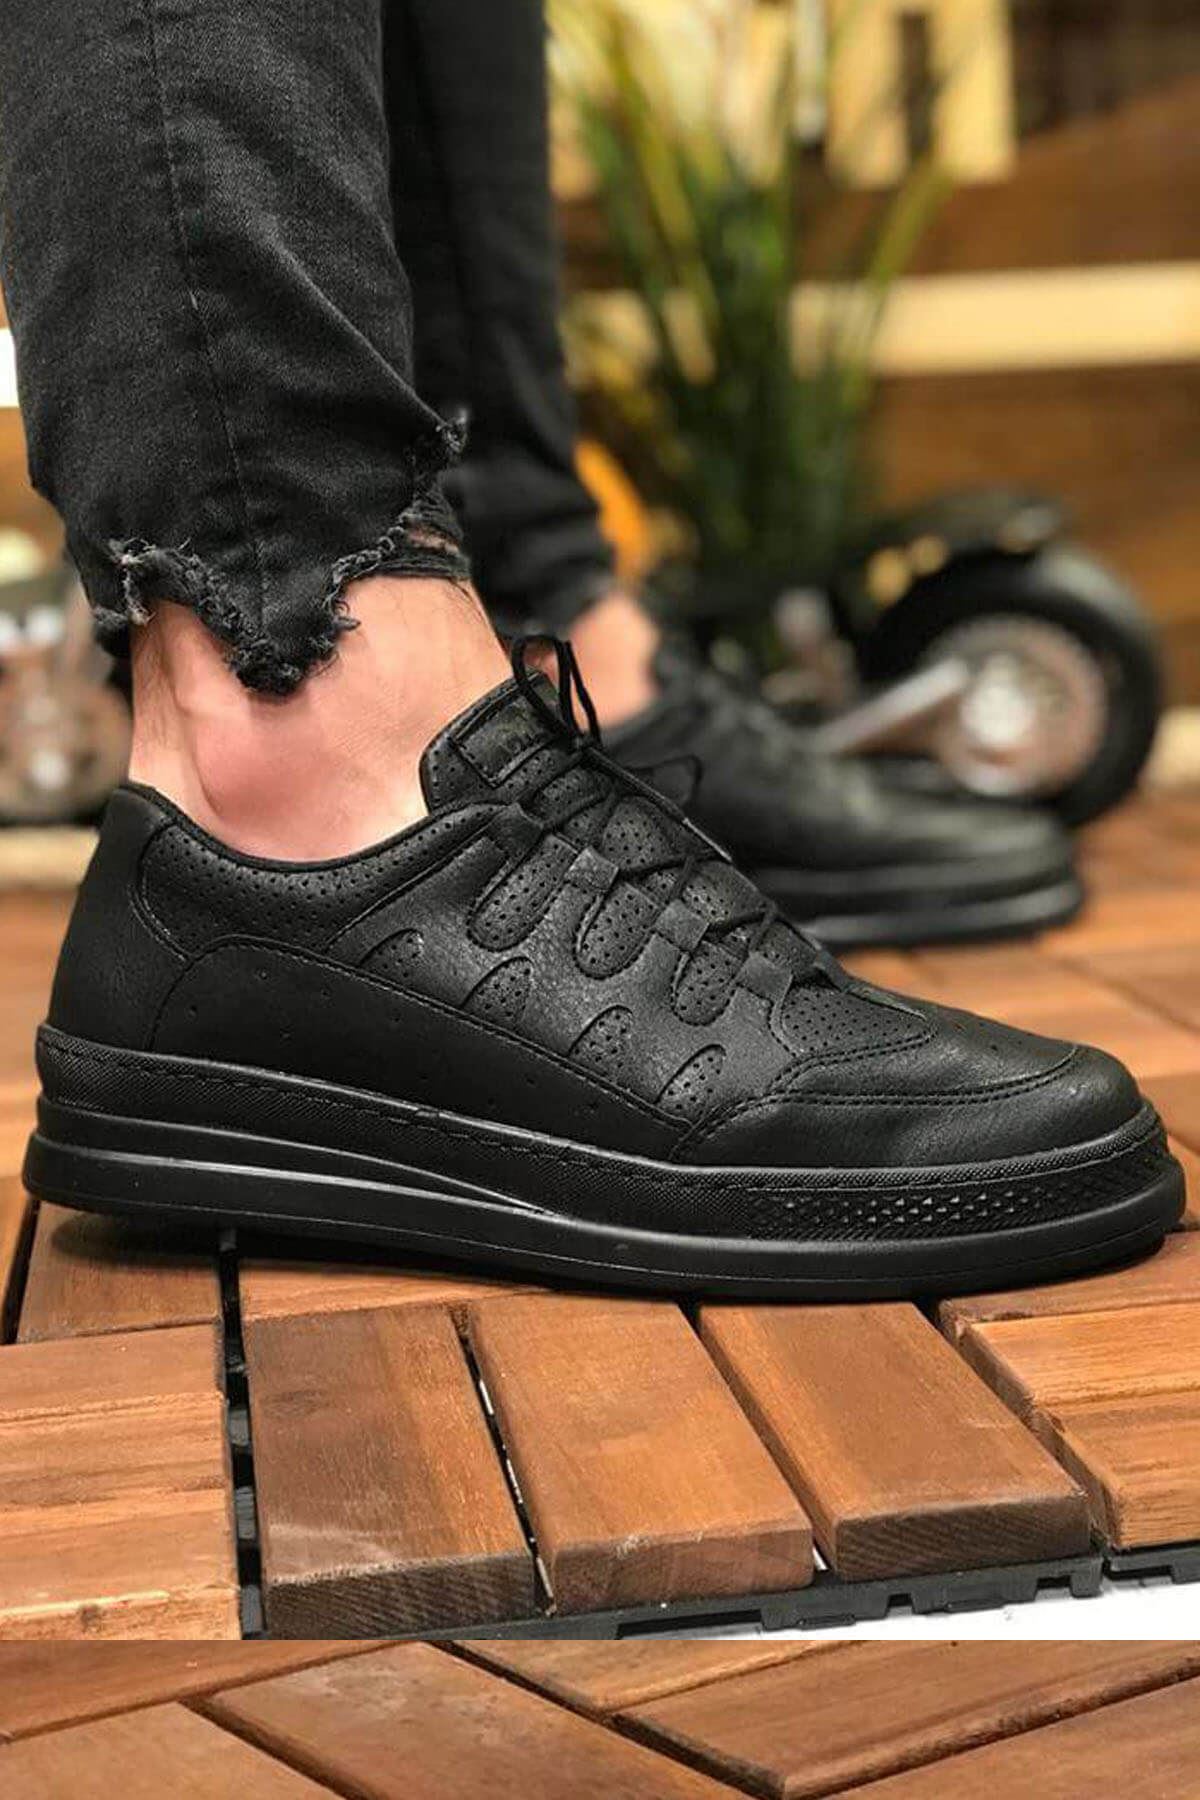 Chekich Men's Casual Shoes Black Color Faux Leather Lace Up Business Fashion Orthopedic Breathable Vulcanized Odorless Light Sport 2021 Brand Wedding Formal Suits Office Sneakers White Sole Walking Footwear CH040 V5